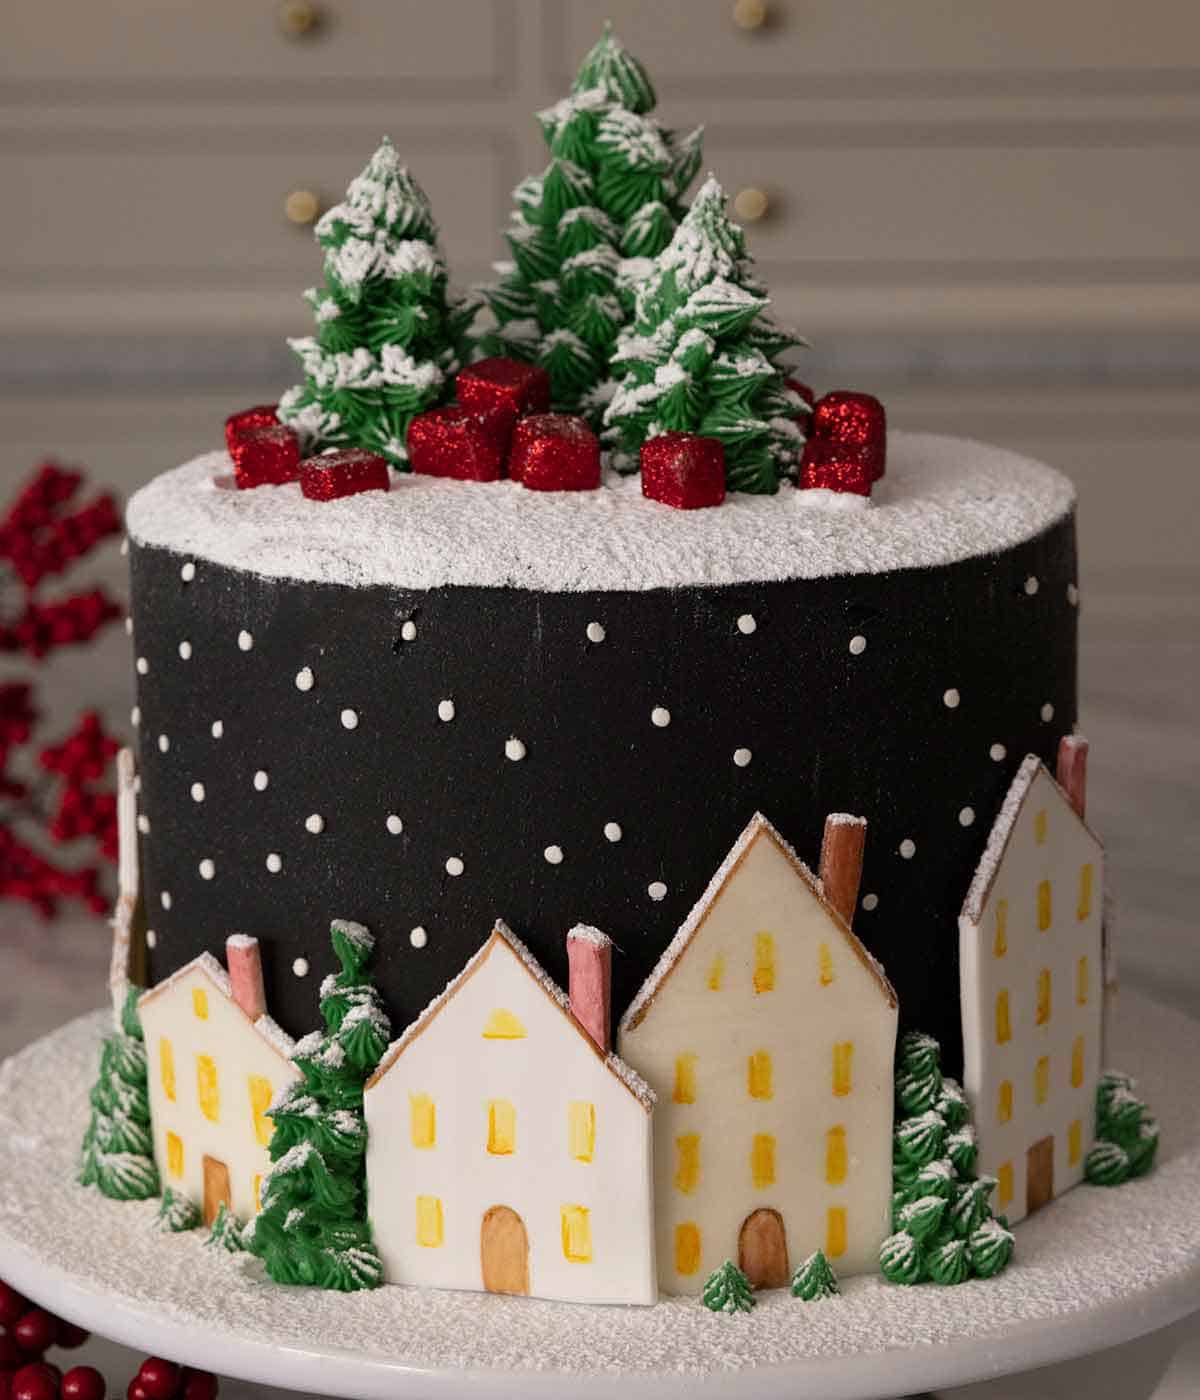 A cake decorated with a starry sky frosting with decorative houses, trees, and gifts.